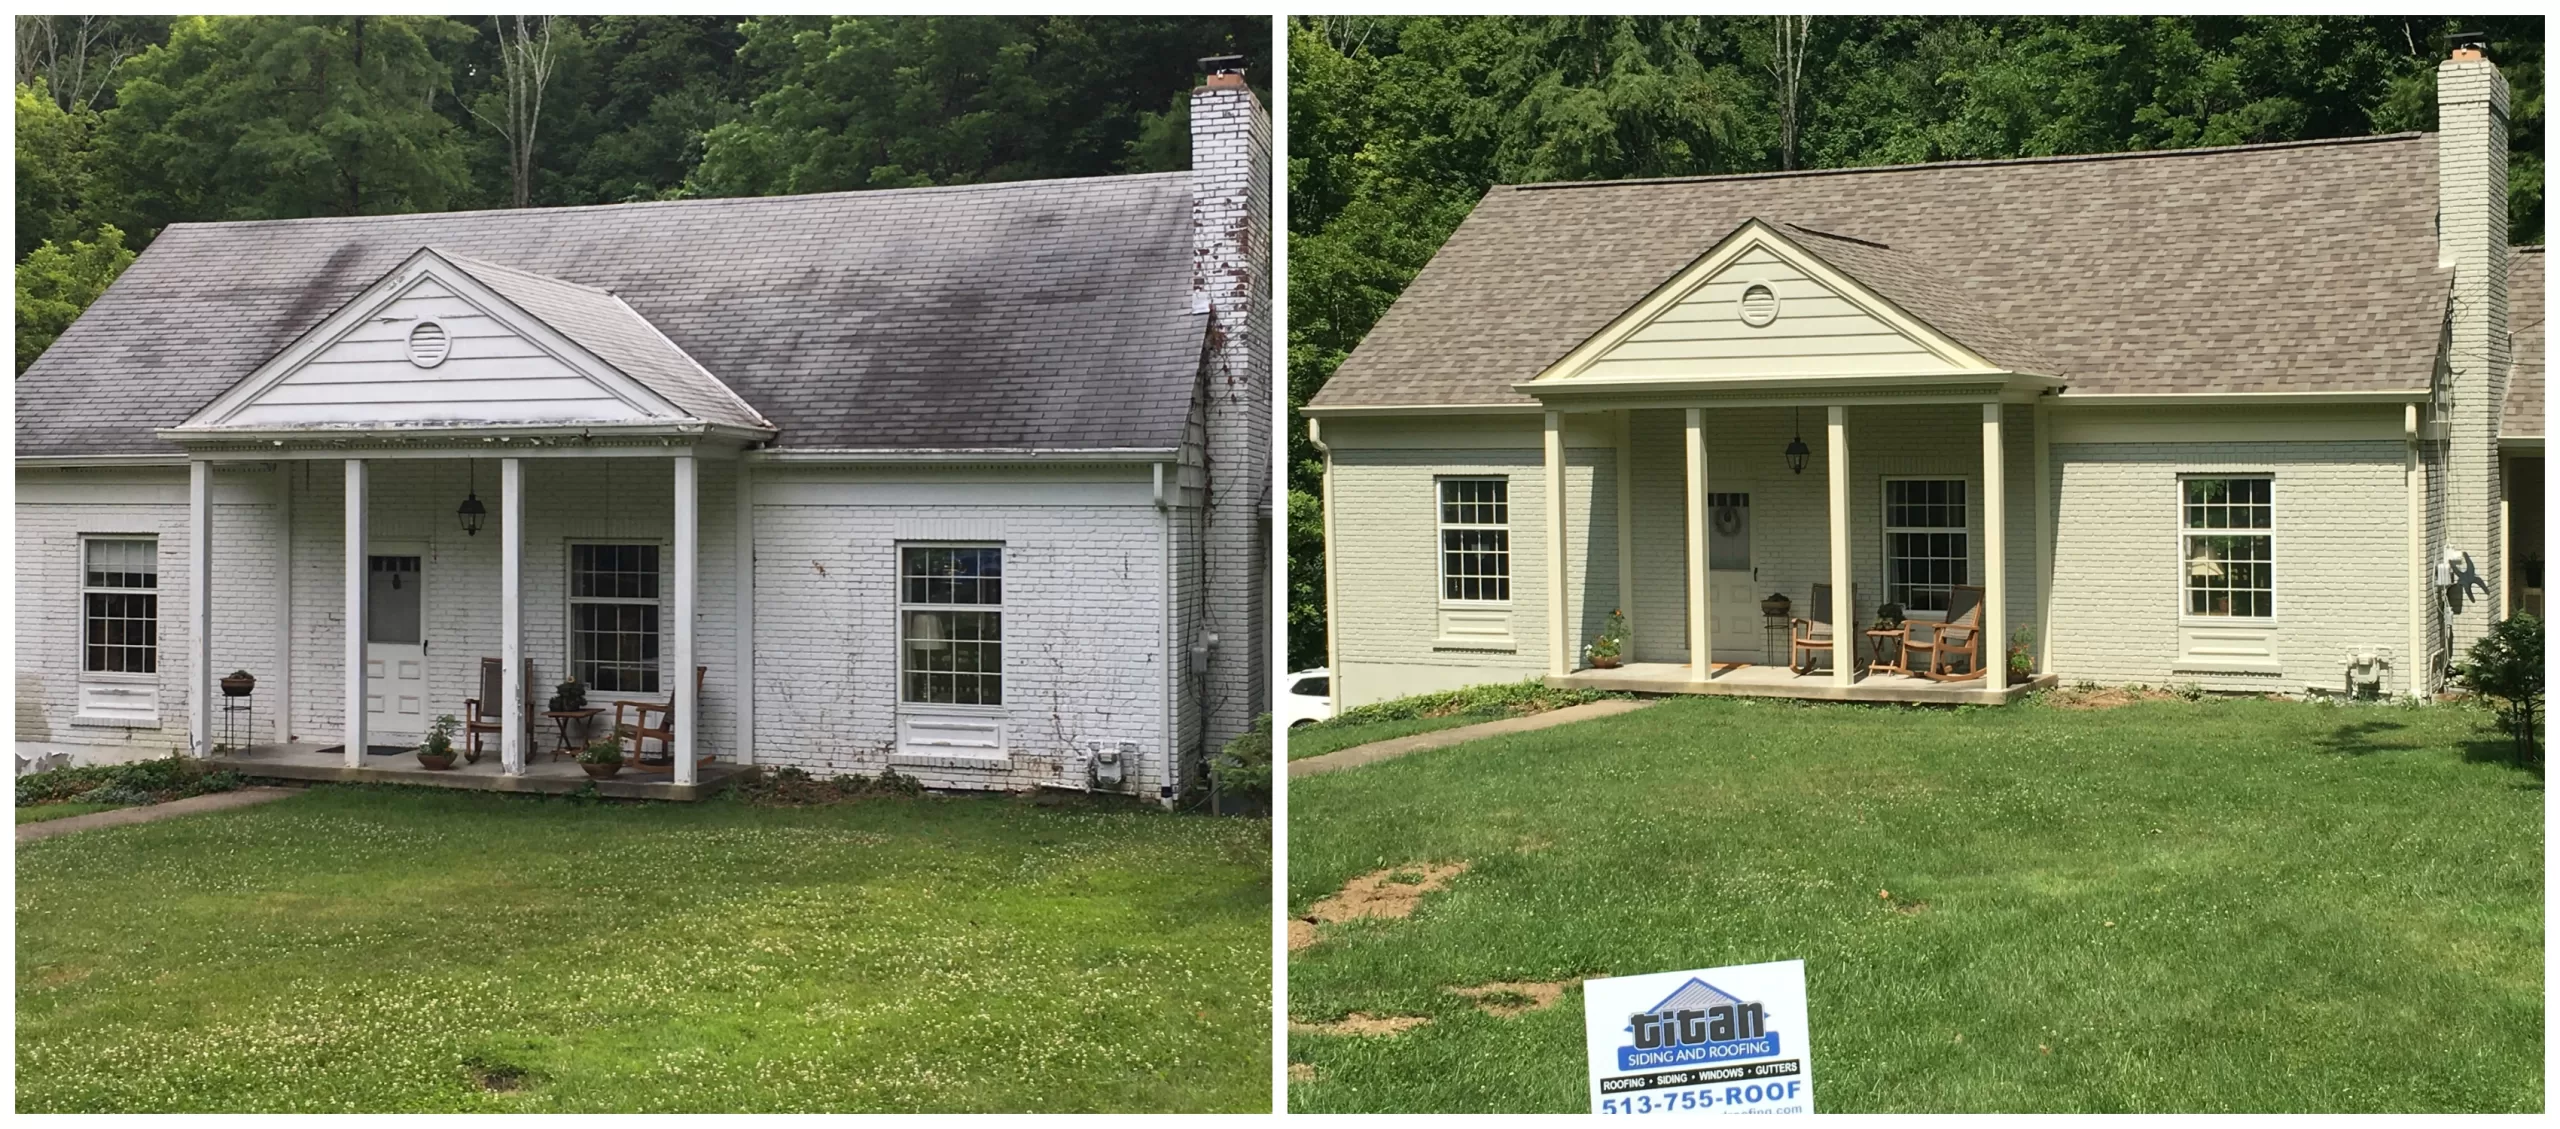 Before (left: white) and After (right: yellow) of a residential home in Cincinnati with a new roof replacement and brick siding restoration.